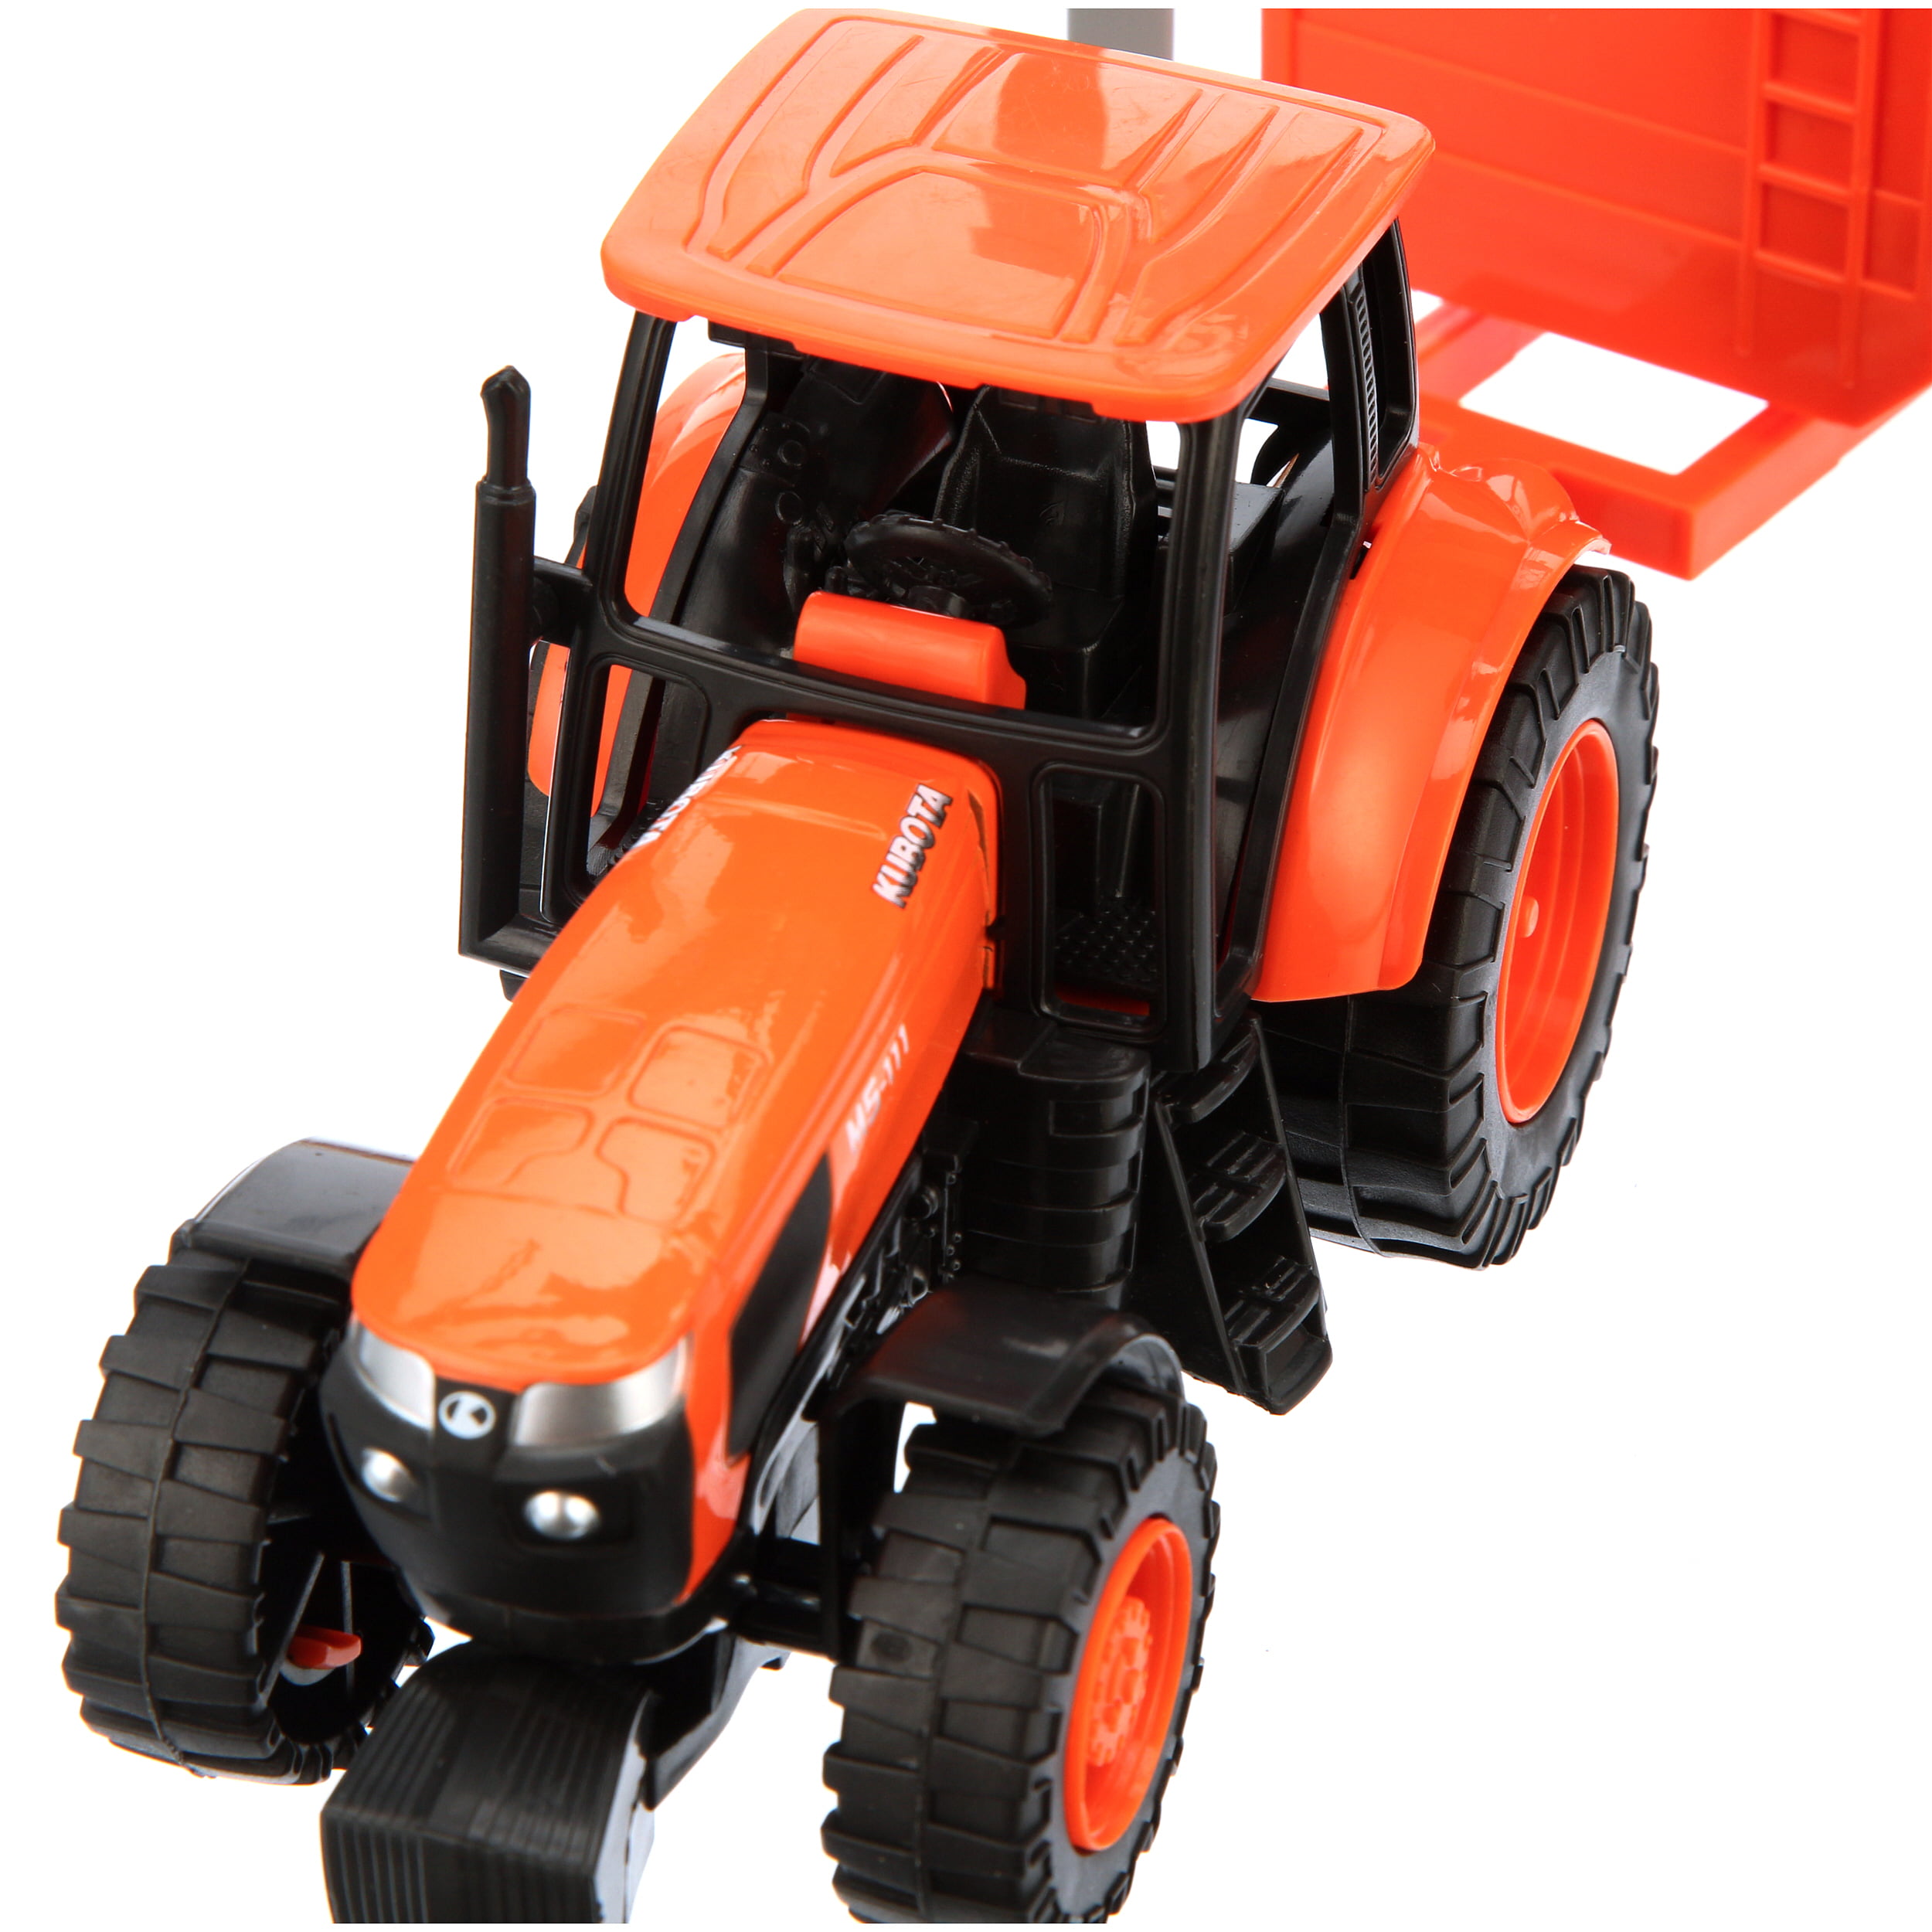 Brand New KUBOTA TOY TRACTOR M5-111 PULL BACK MINI TOY Approximate 4"×3" M5-111 